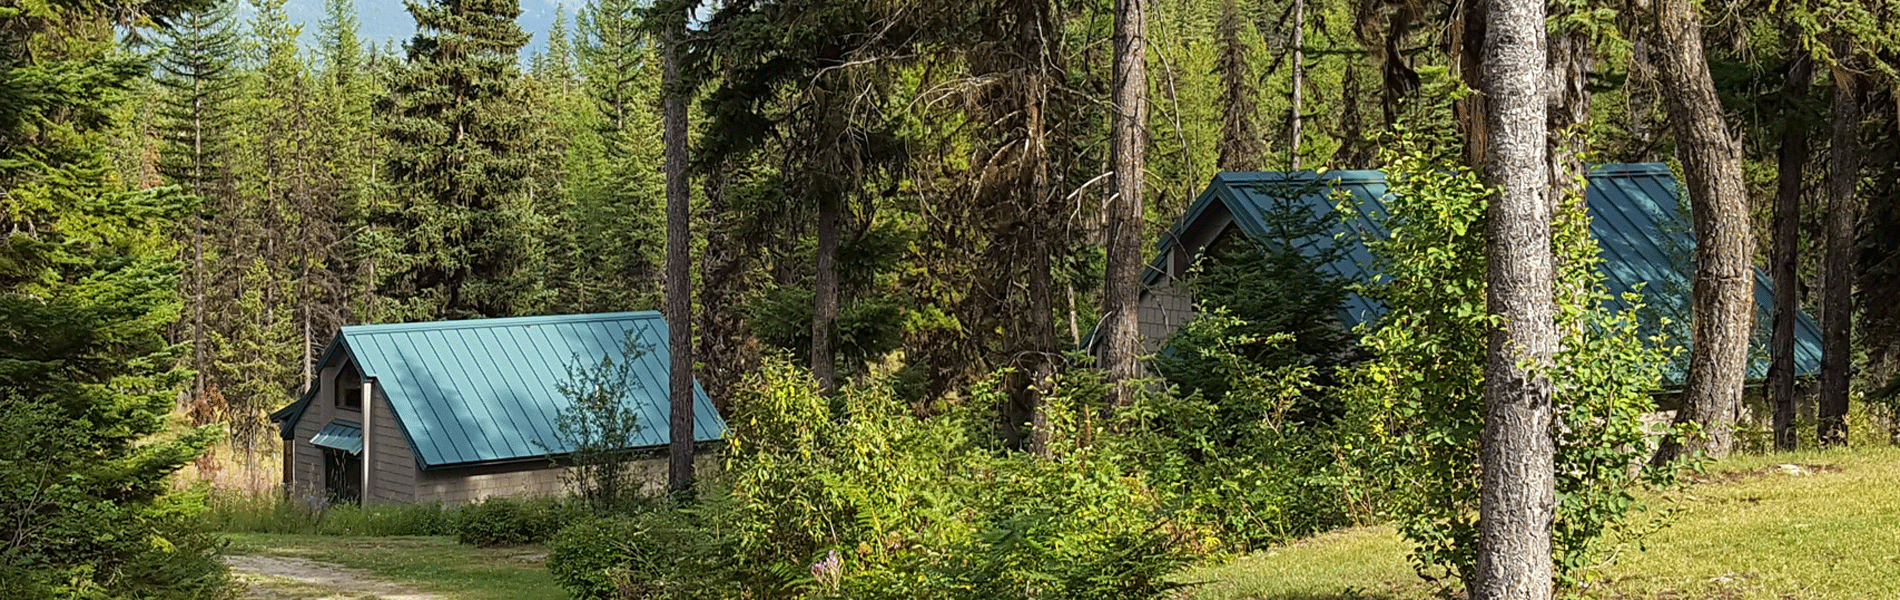 Cabins-in-Trees-1900-x-600-WEB.gif